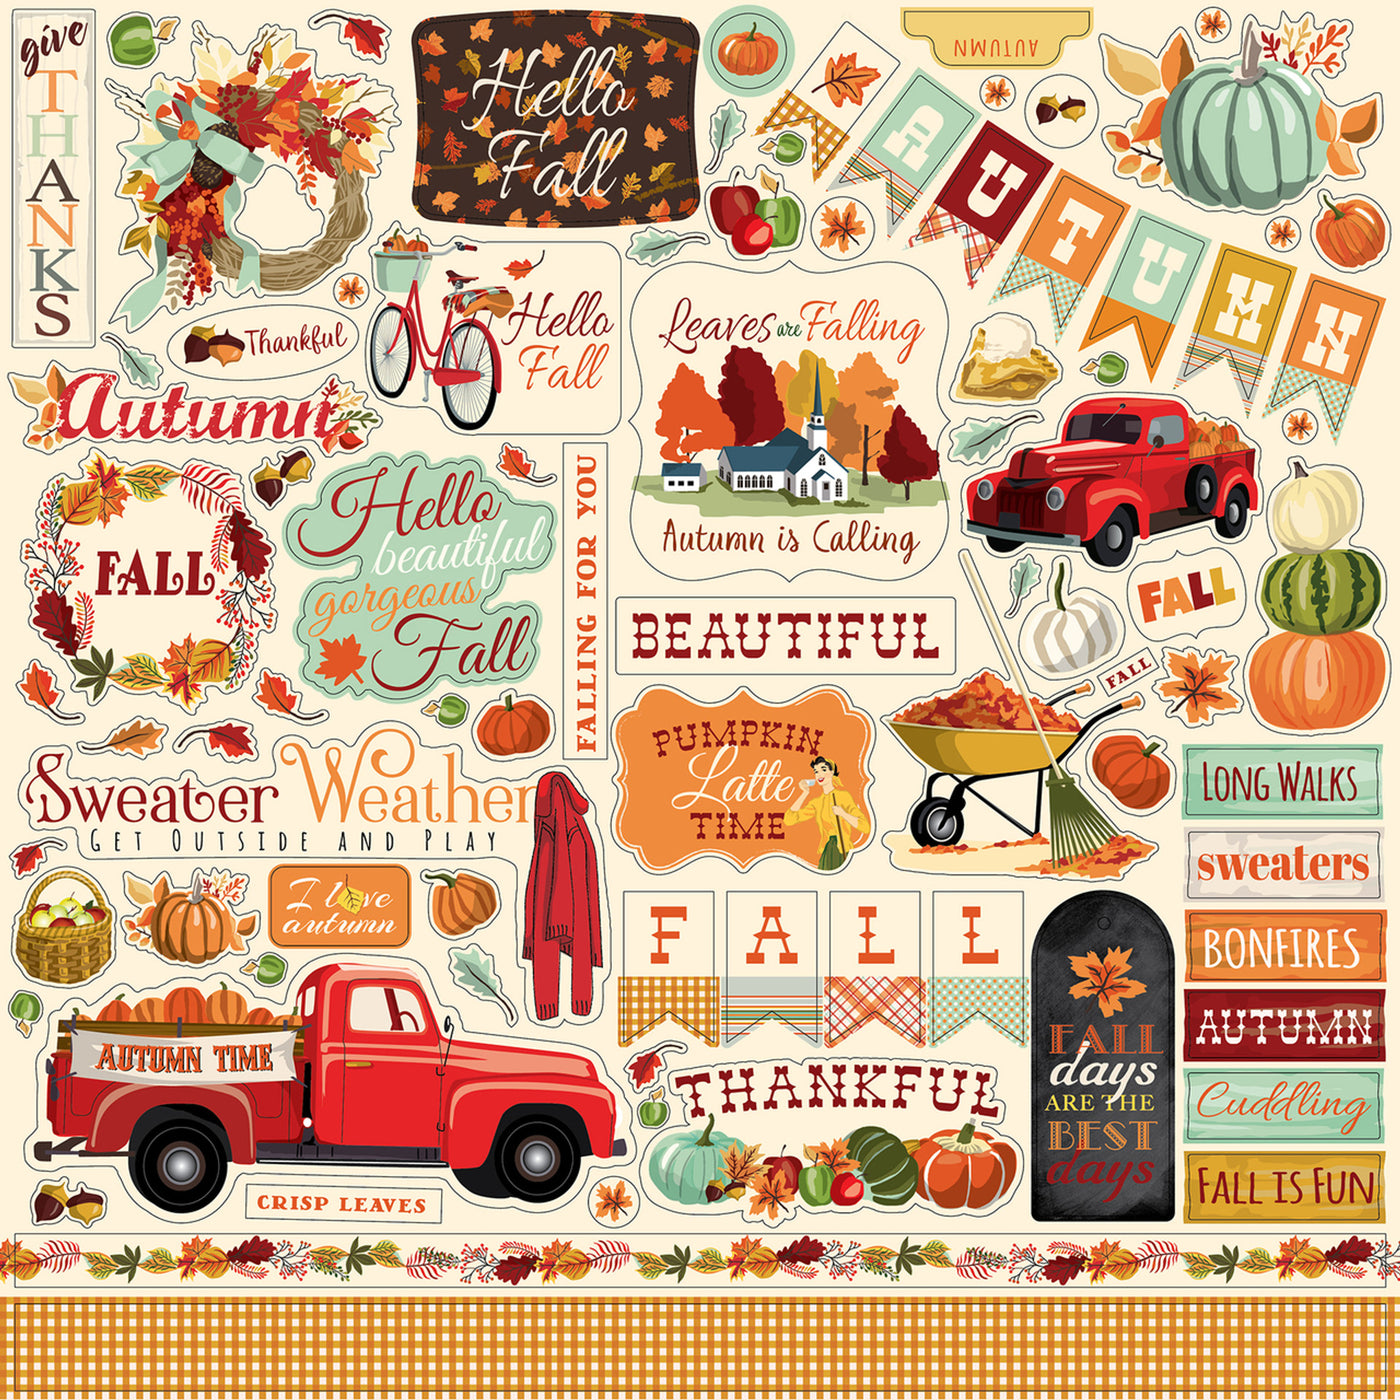 Fall Break Elements 12" x 12" Cardstock Stickers from Fall Market Collection by Carta Bella. Stickers include phrases, banners, borders, tags, pumpkins, fall florals, red truck, and more!